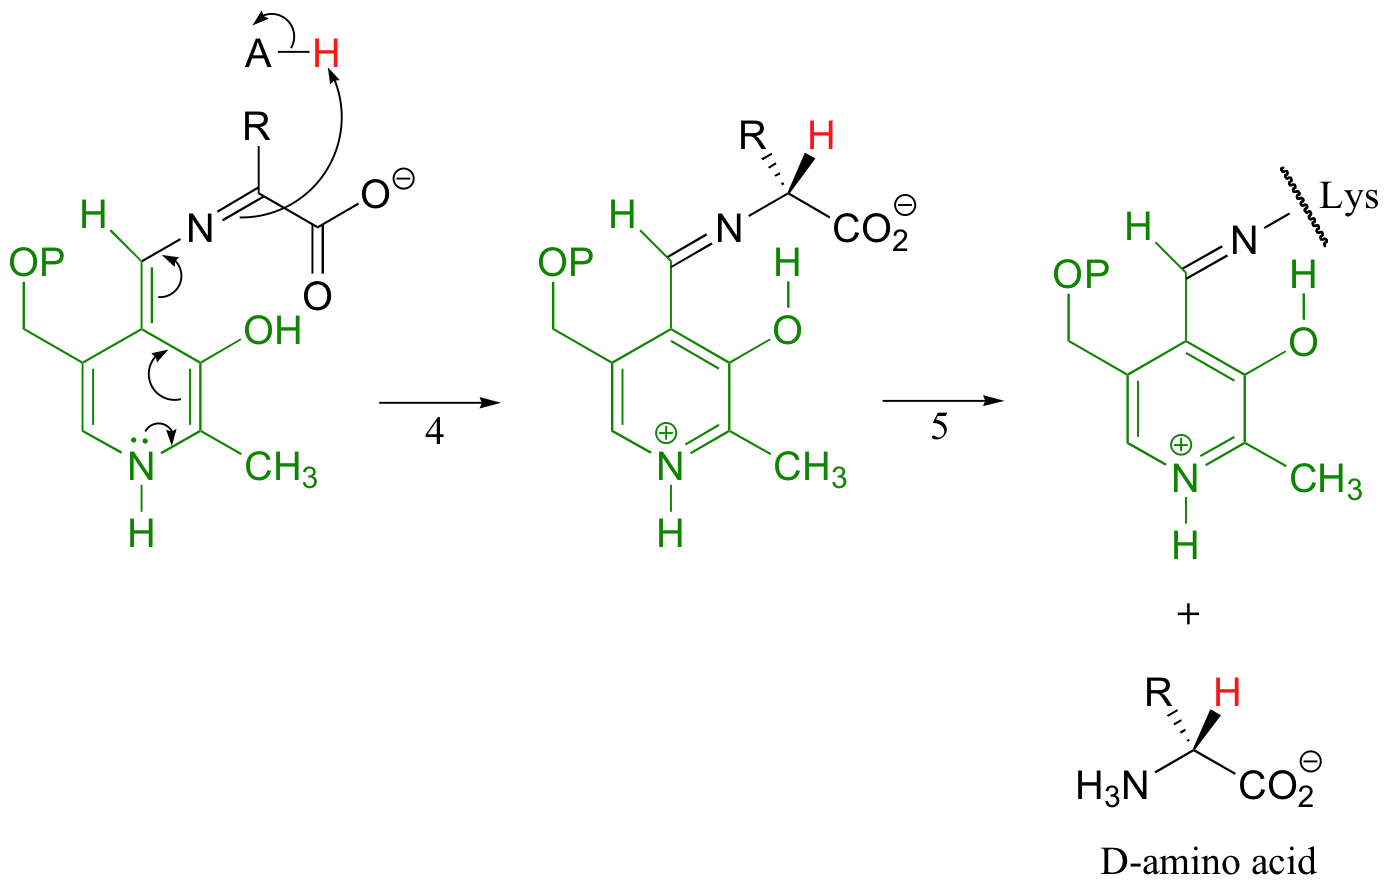 isomers andfrom C-alkanes